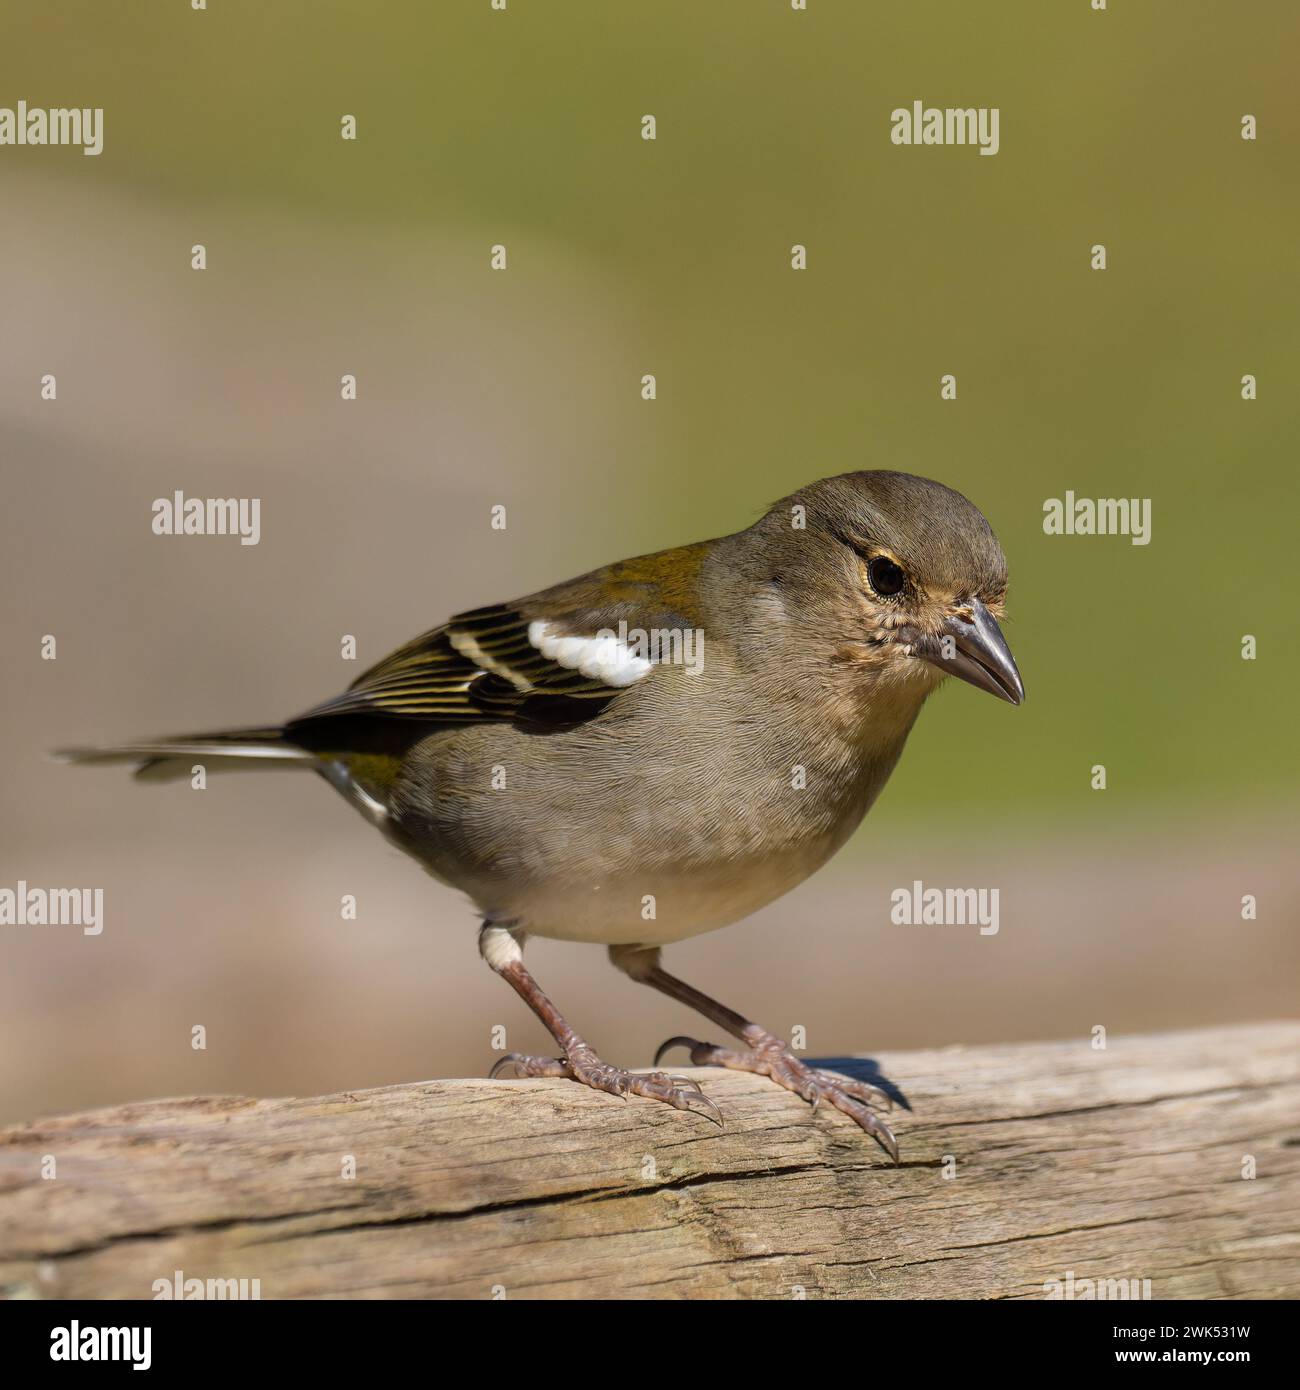 A female Madeiran chaffinch, Fringilla maderensis, which is endemic to the island of Madeira. Stock Photo